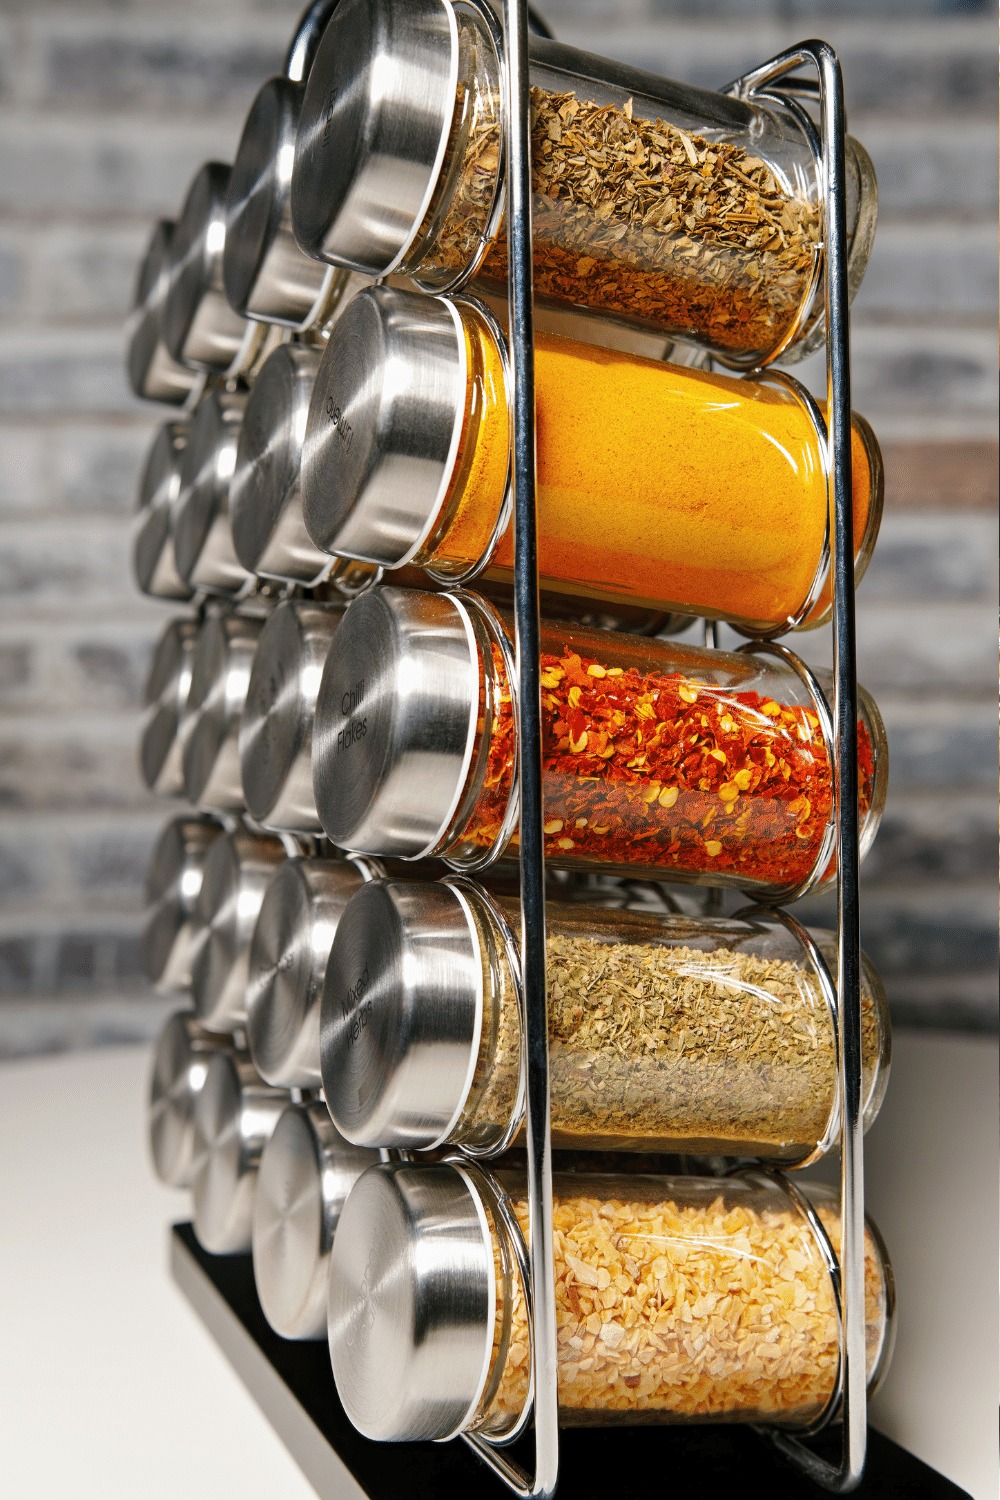 Spice Rack Showdown: Unveiling the Best Racks & Blends for a Flavor-Packed Kitchen!